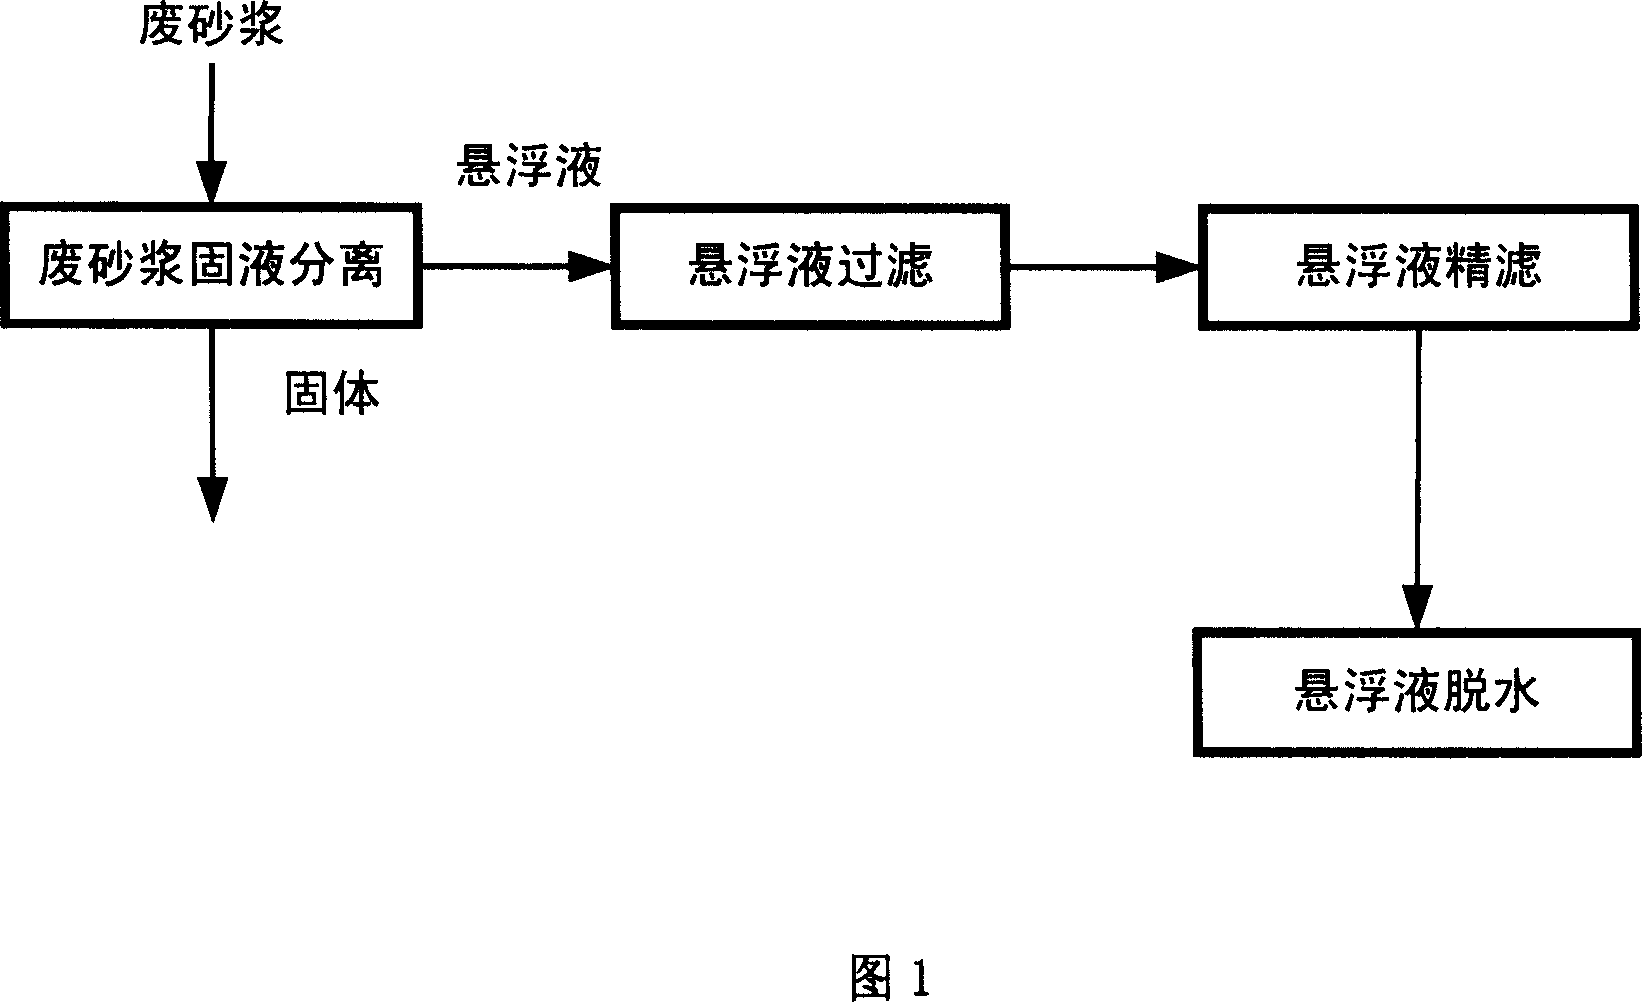 Method of recycling cutting suspension